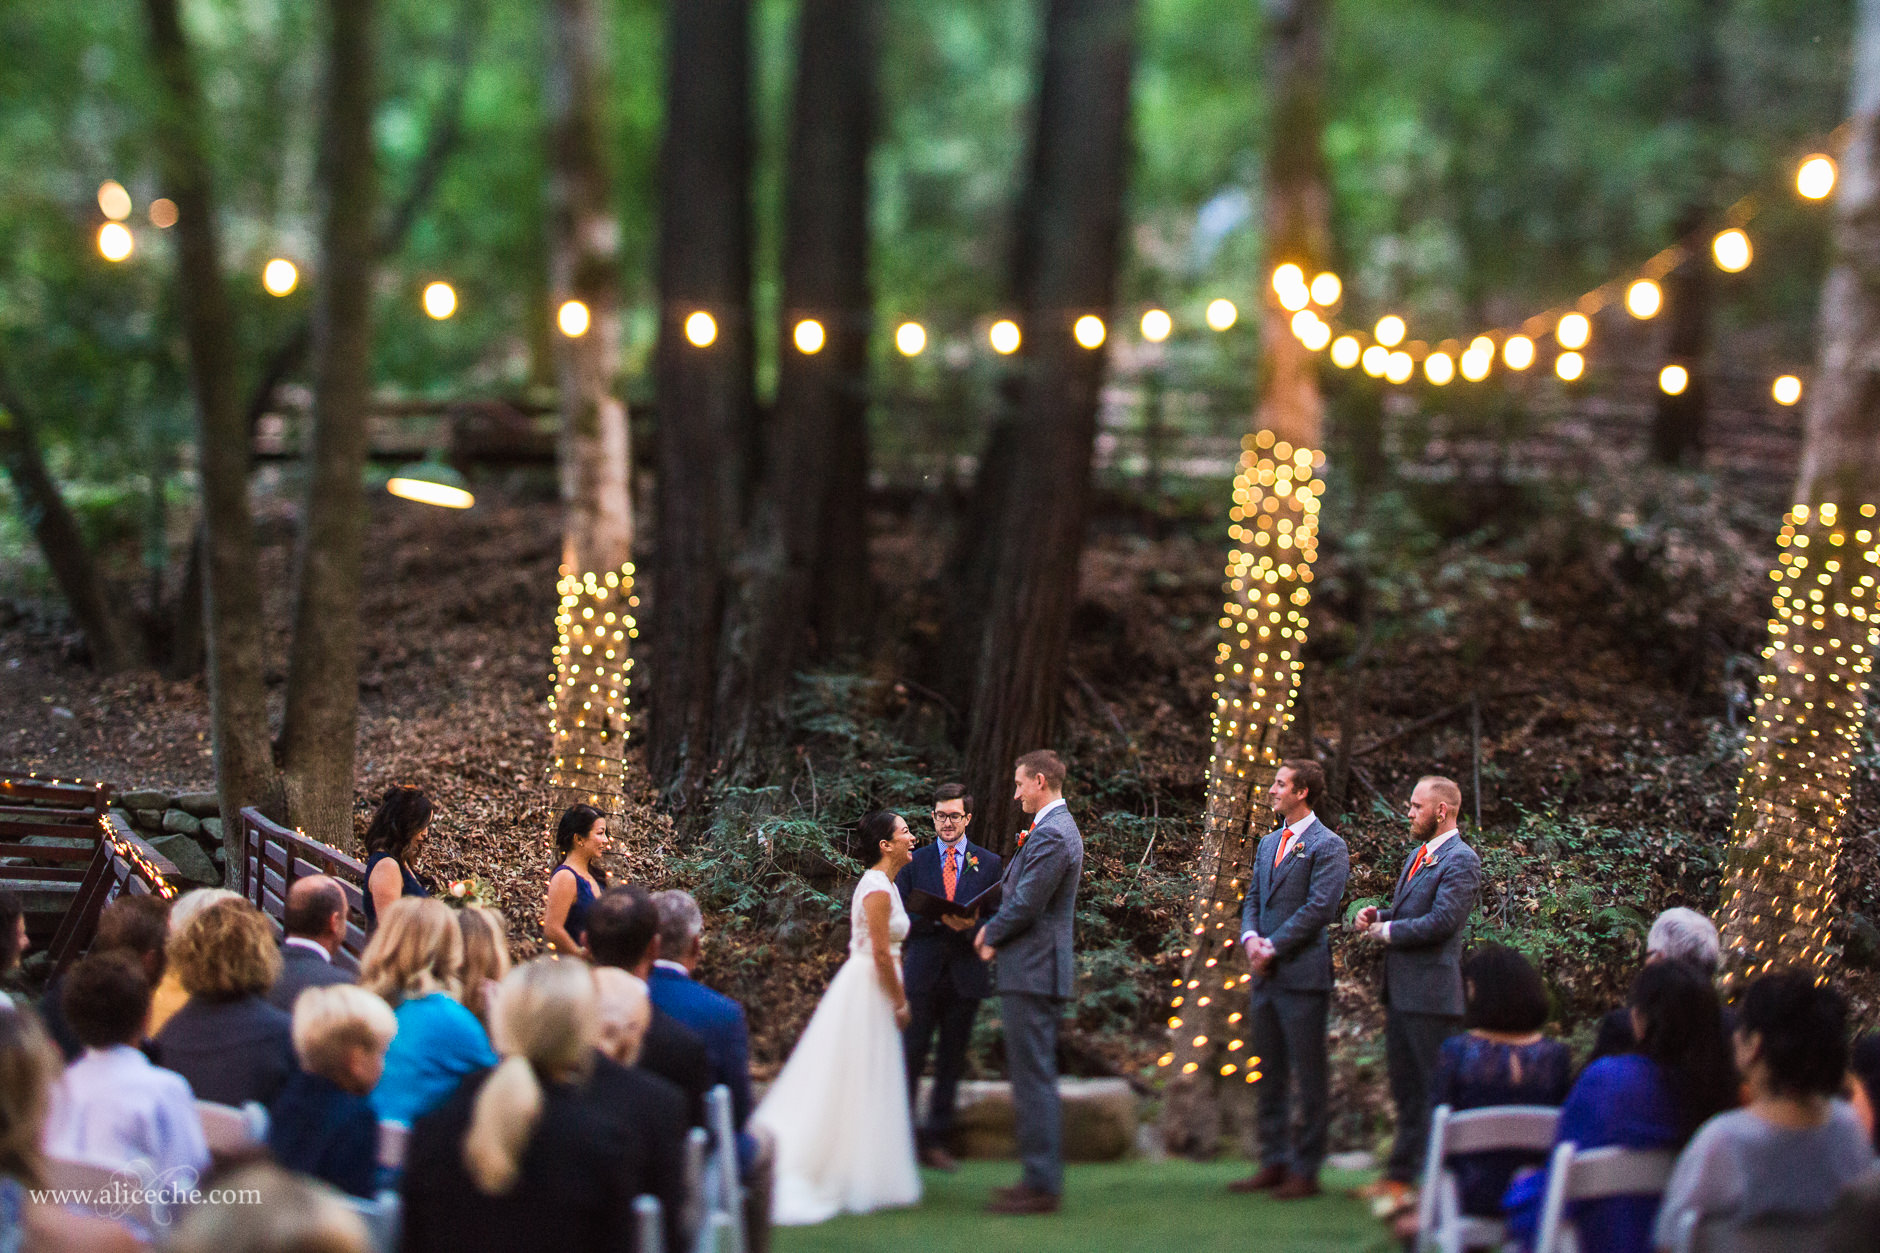 Magical Redwood Forest Wedding Ceremony at Saratoga Springs